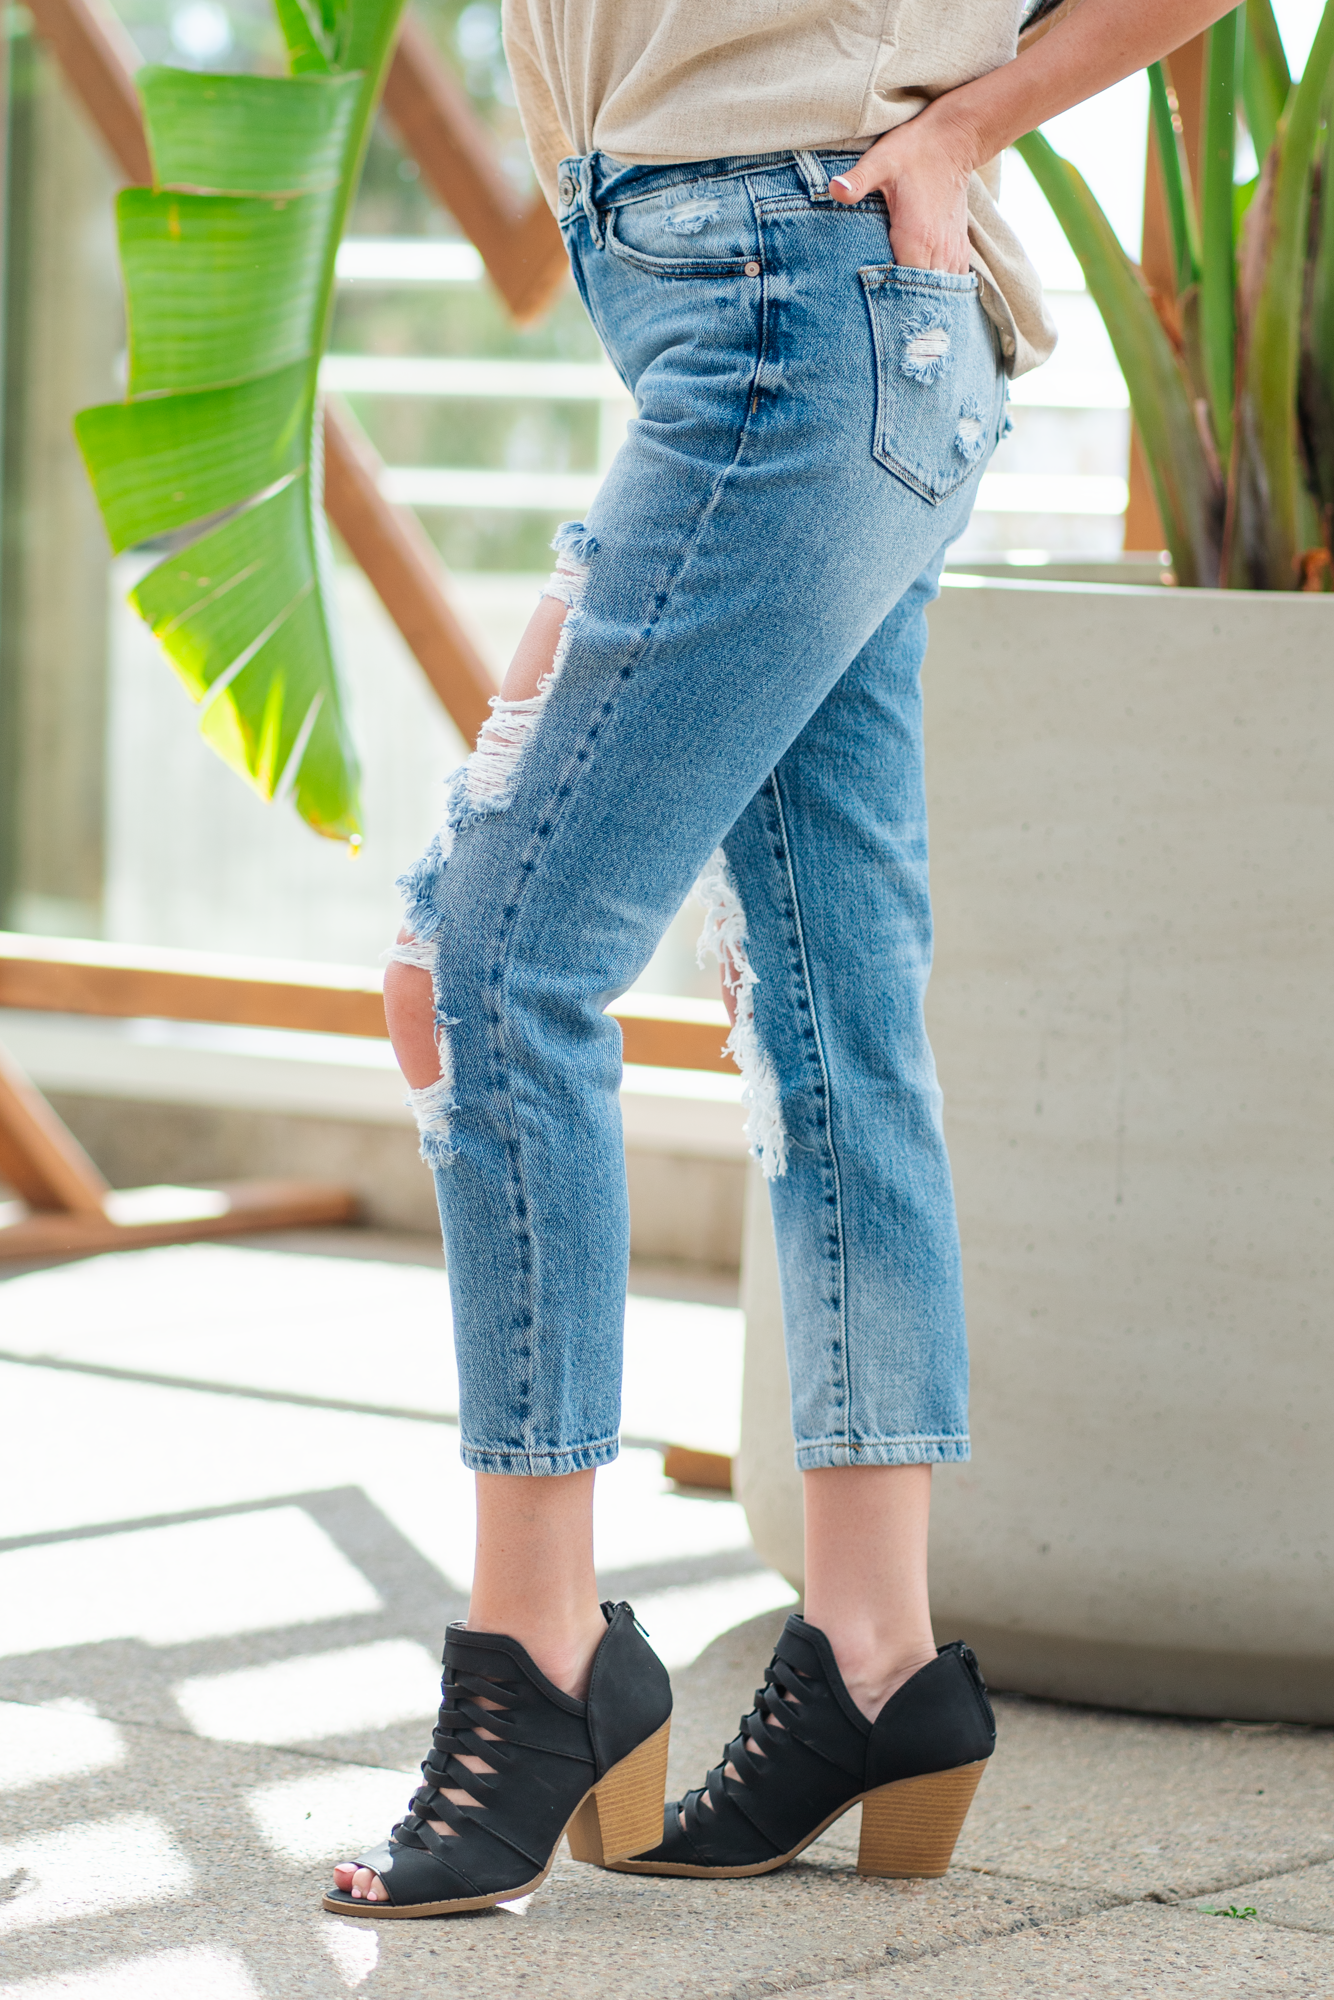 KanCan Jeans  These boyfriend jeans will become your new favorite look. Pair with a  tank and heels for a casual spring look. Color: Medium Blue Wash Cut: Straight Fit, 27" Inseam* Rise: Mid-Rise, 9.75" Front Rise* 94% COTTON, 5% POLYESTER, 1% SPANDEX Fly: Exposed Button Fly Style #: KC8571M Contact us for any additional measurements or sizing.  *Measured on the smallest size, measurements may vary by size.